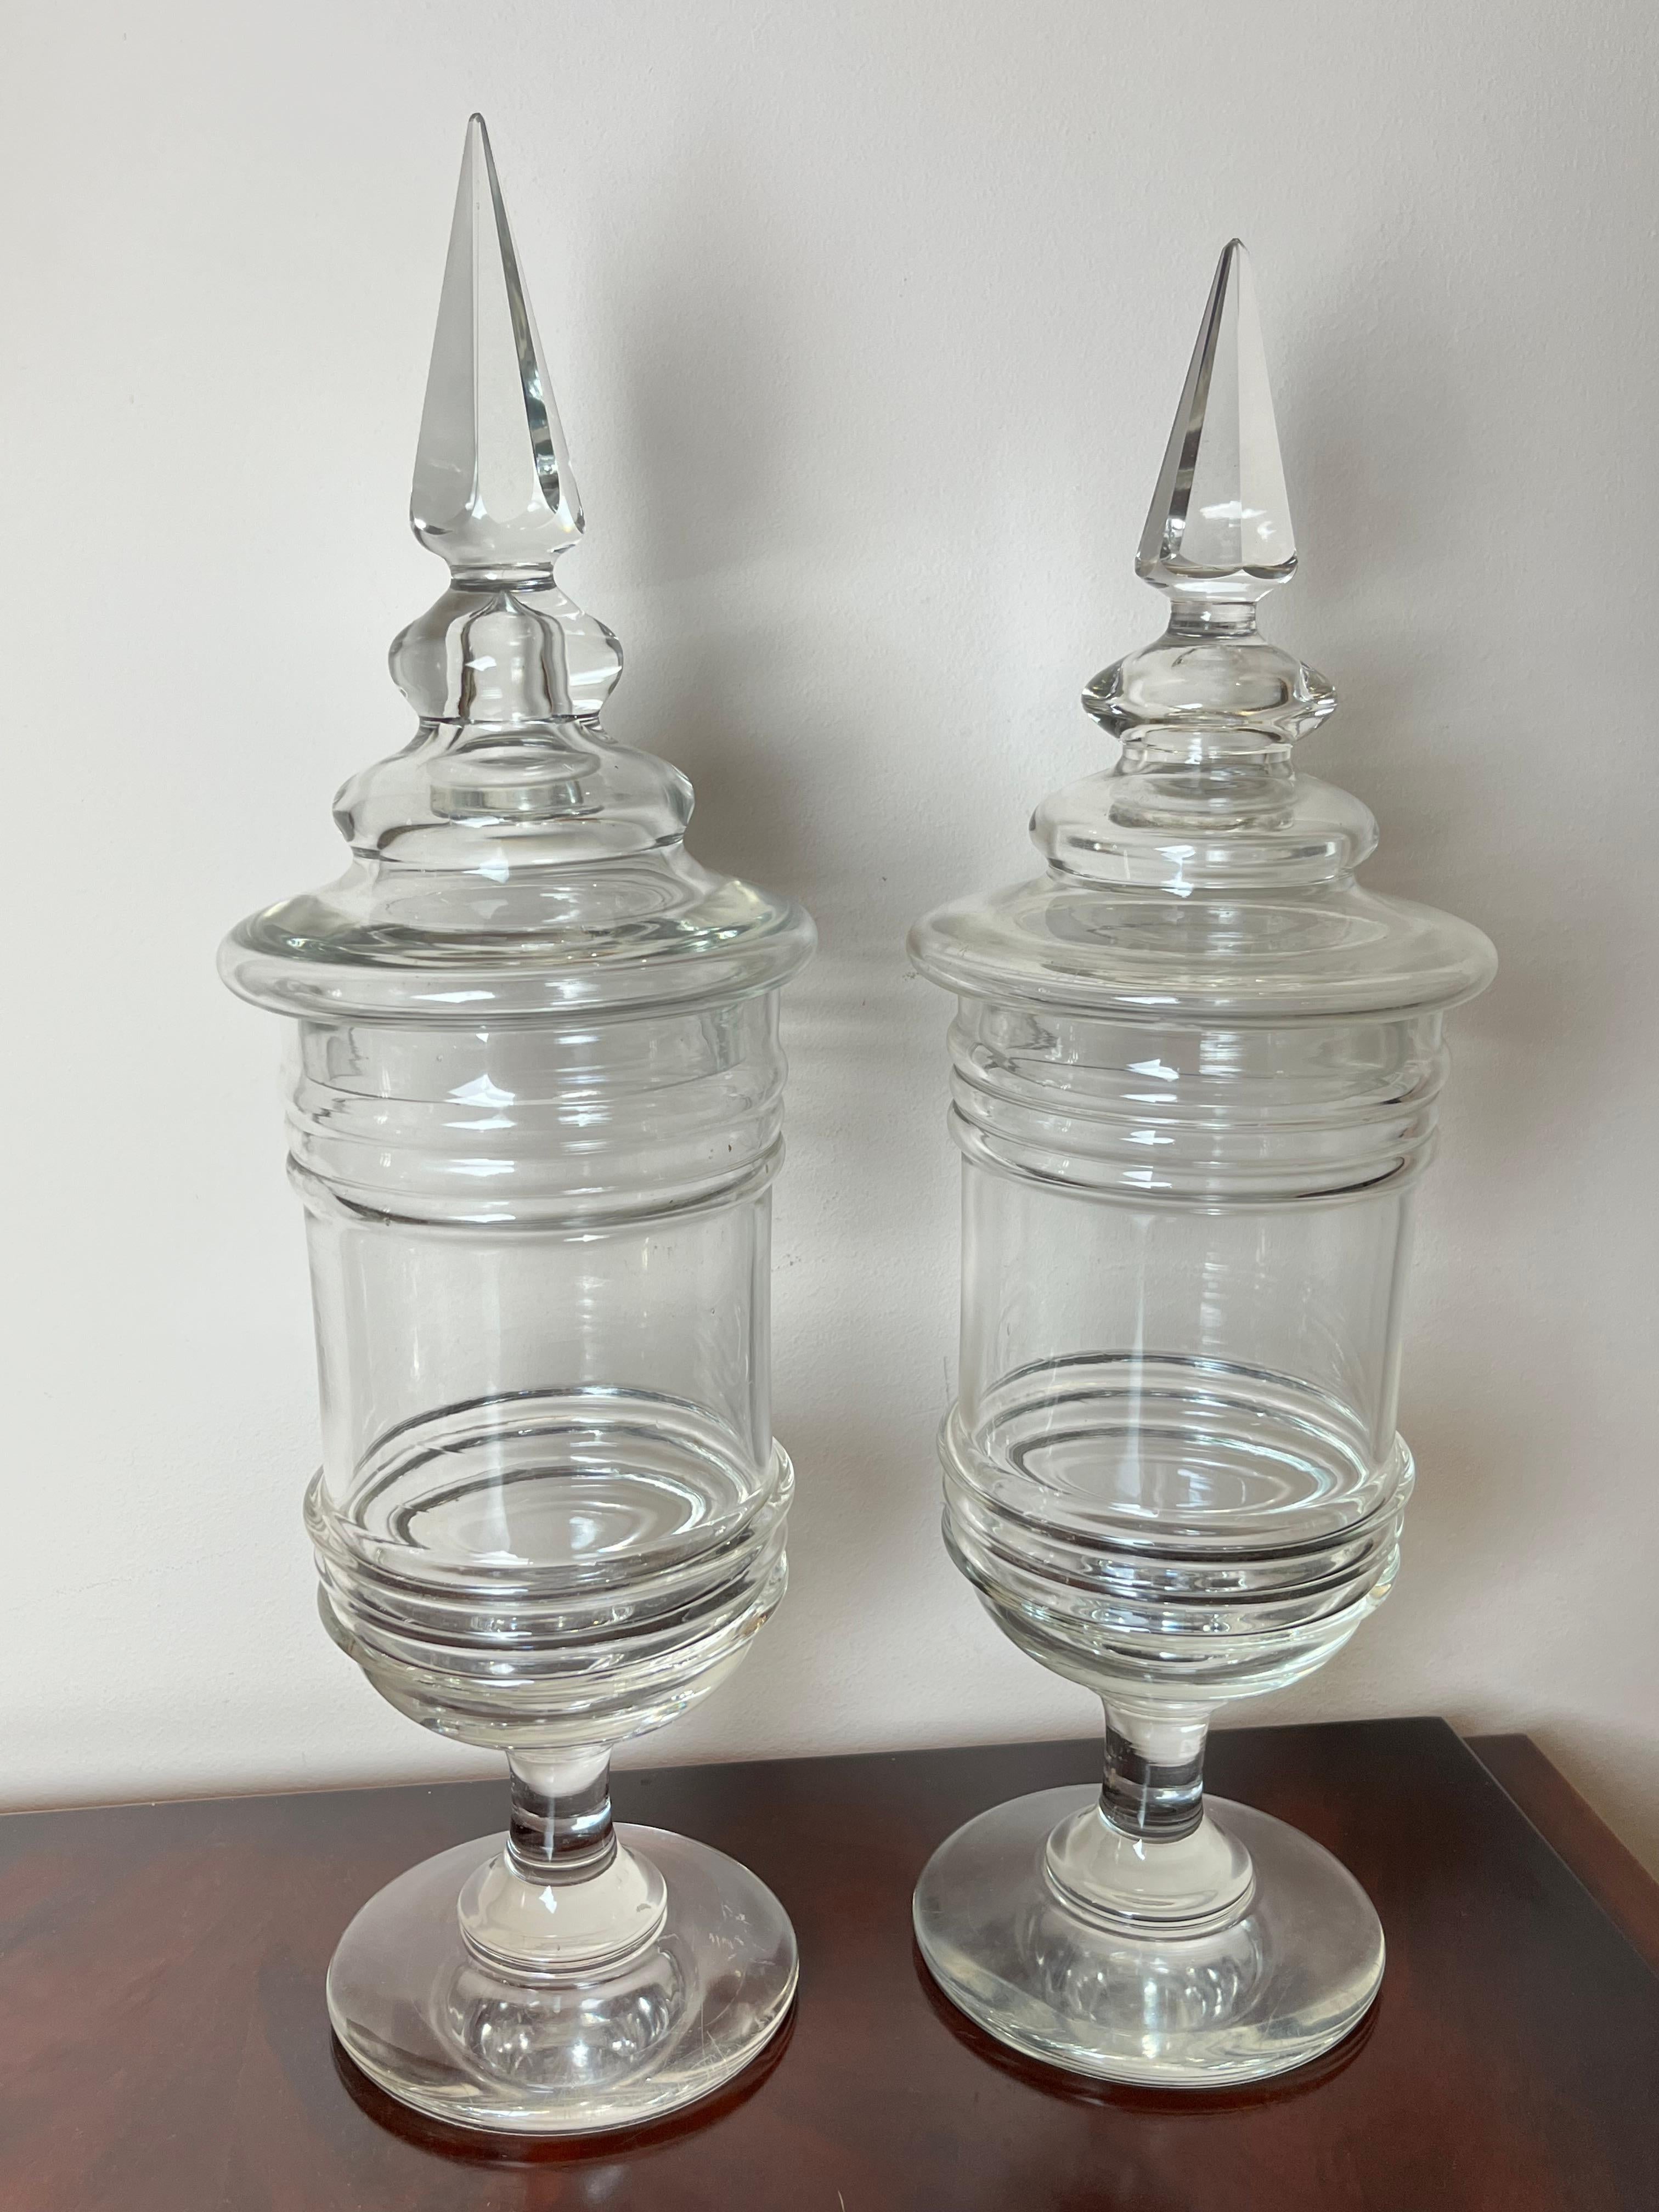 Pair of glass pharmacy jars, Italy, 1930s
Found in an old disused pharmacy.
They are intact and in excellent condition.
Being handcrafted, they have slightly different dimensions. By carefully observing the crystal you will notice small smudges and